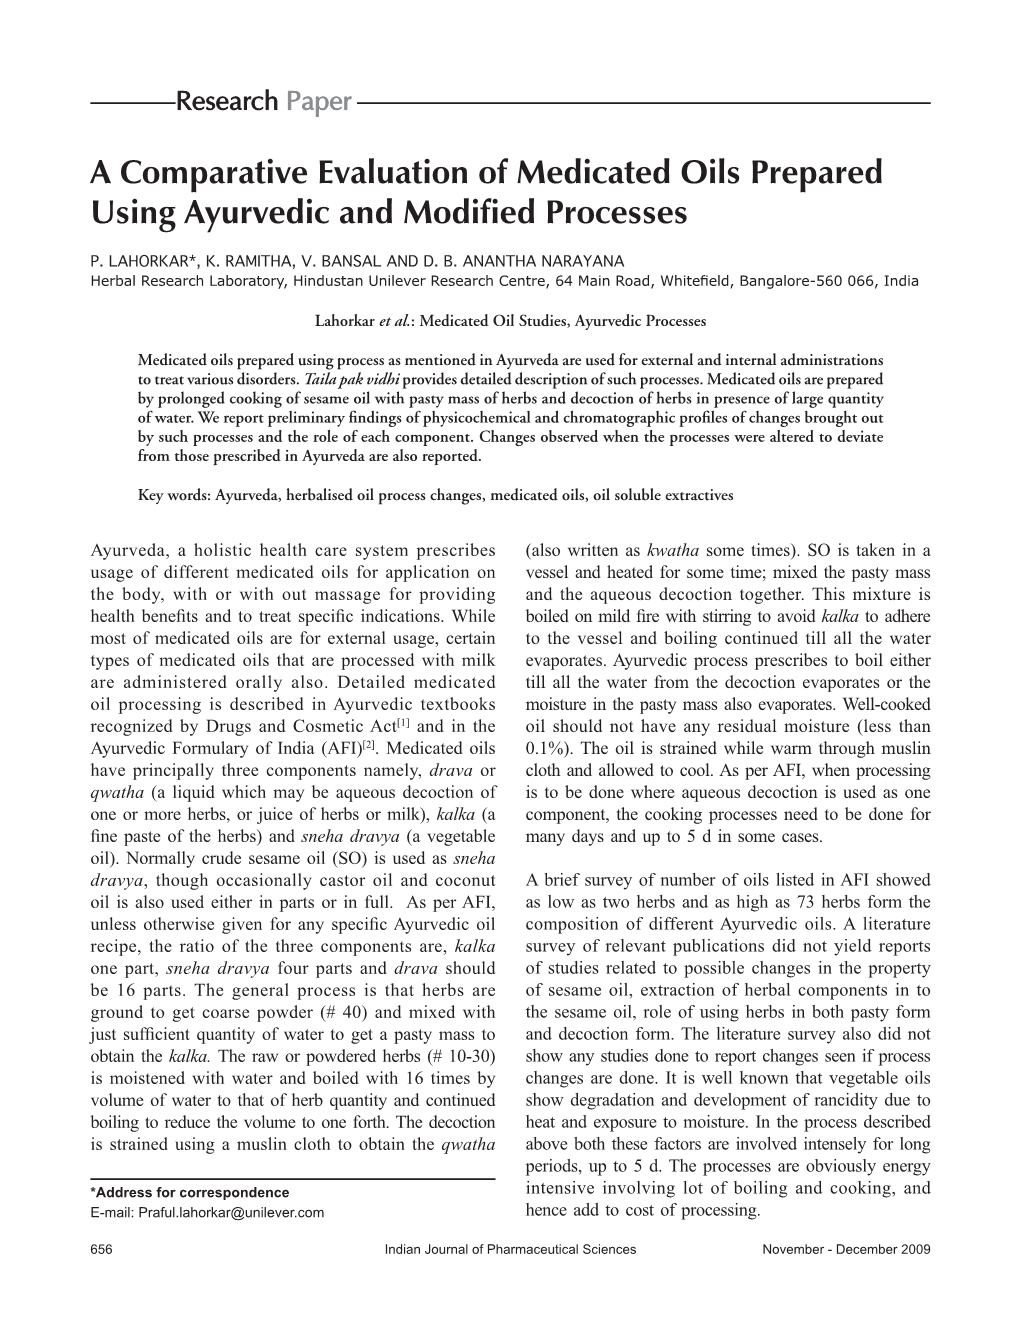 A Comparative Evaluation of Medicated Oils Prepared Using Ayurvedic and Modified Processes